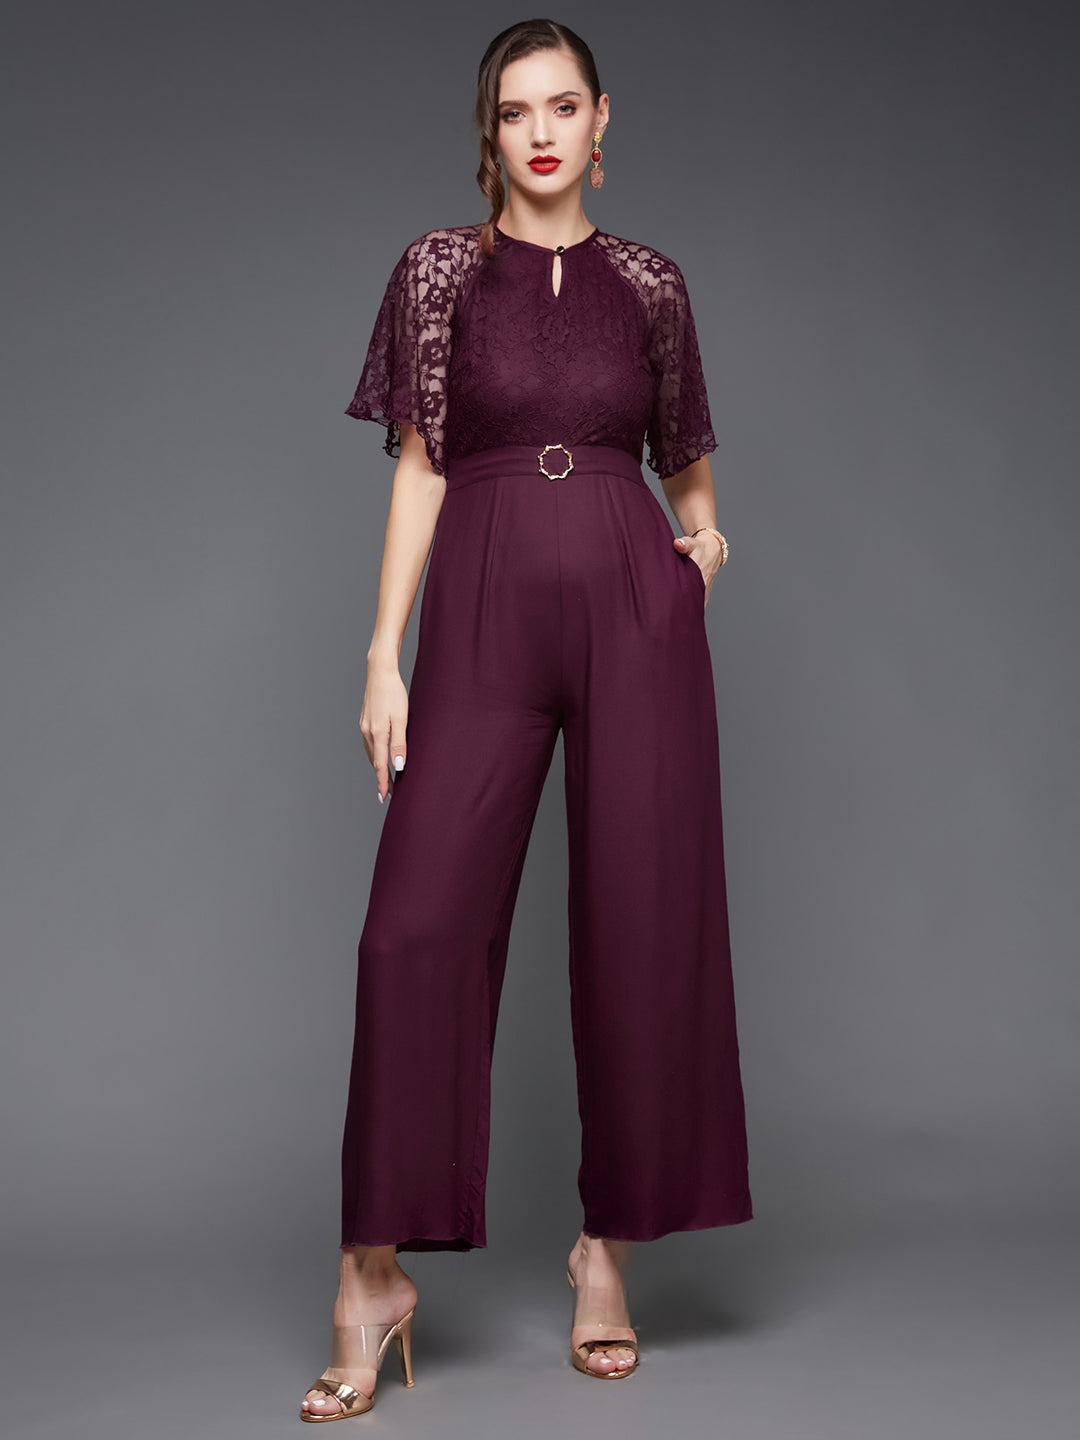 Women's Red Viscose Rayon  Jumpsuits